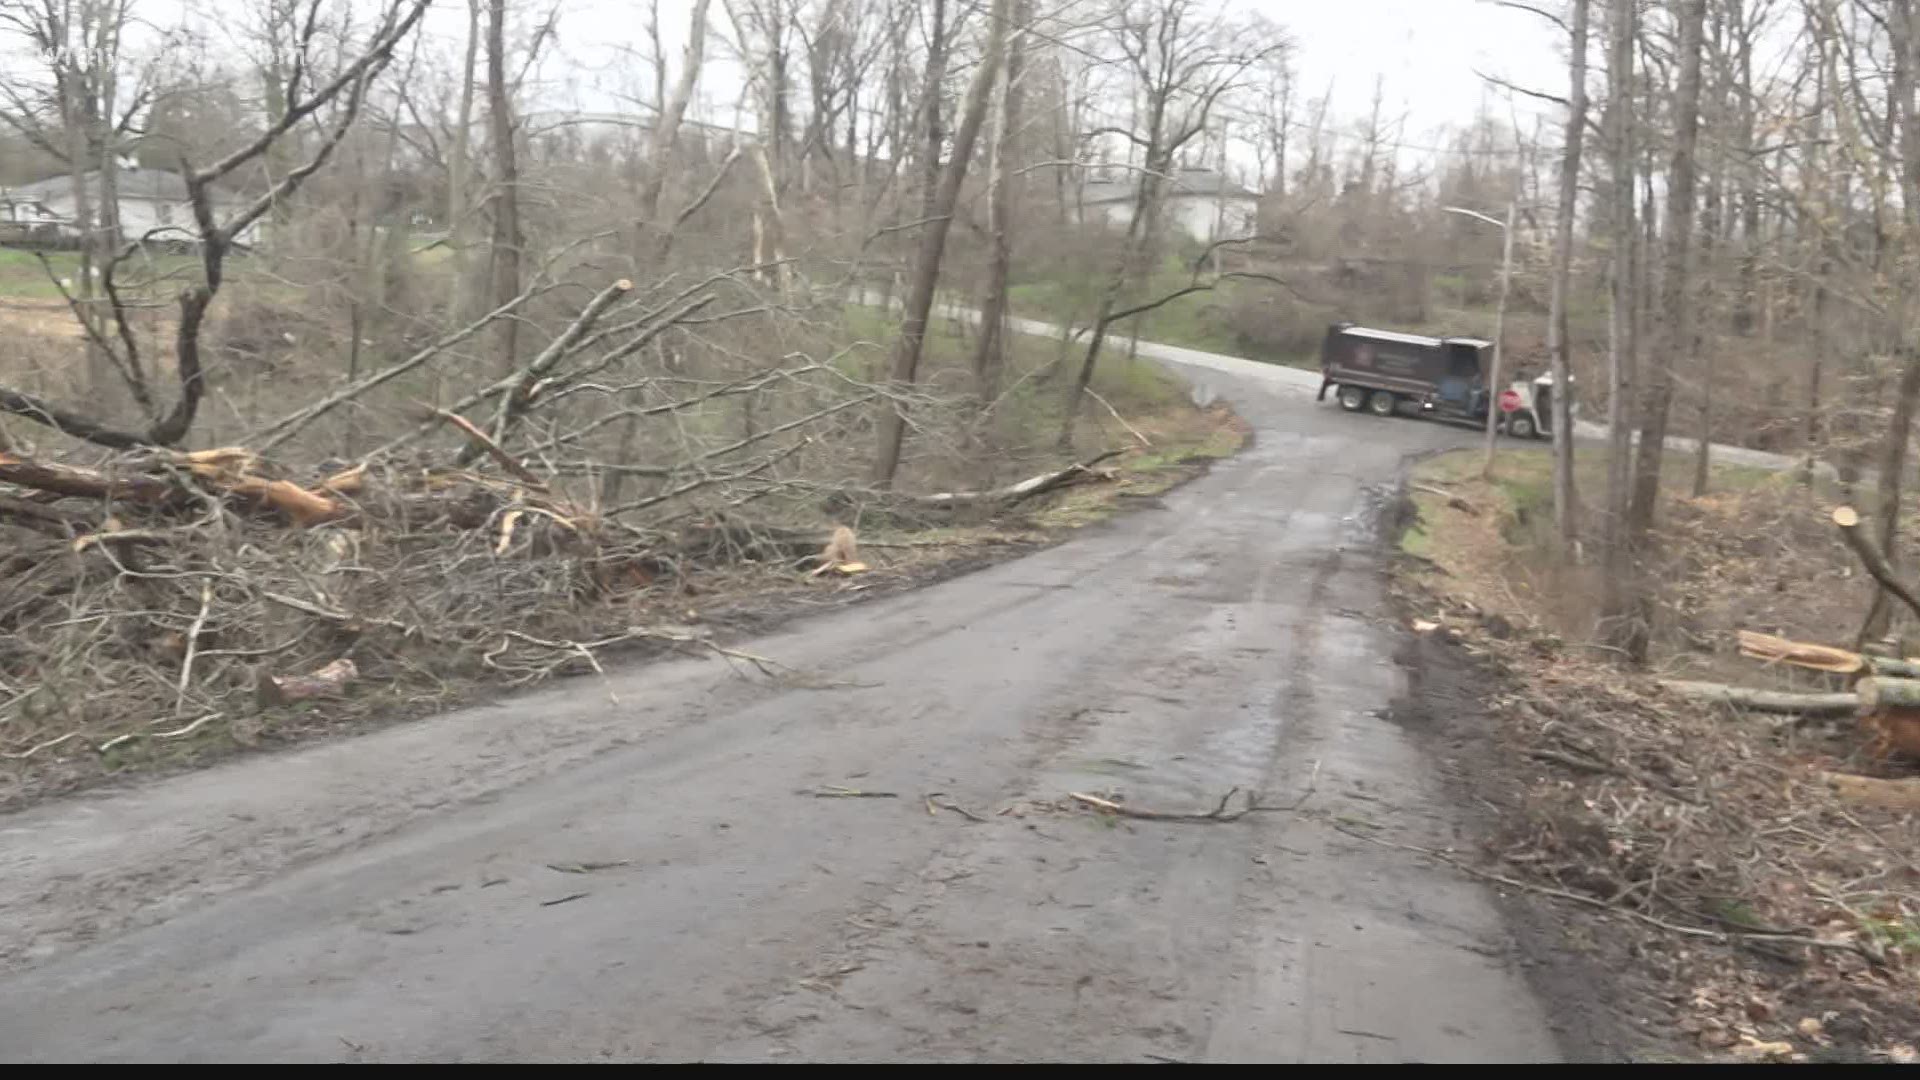 The NWS said the EF-0 tornado traveled about a mile and packed estimated 85 mile-per-hour winds